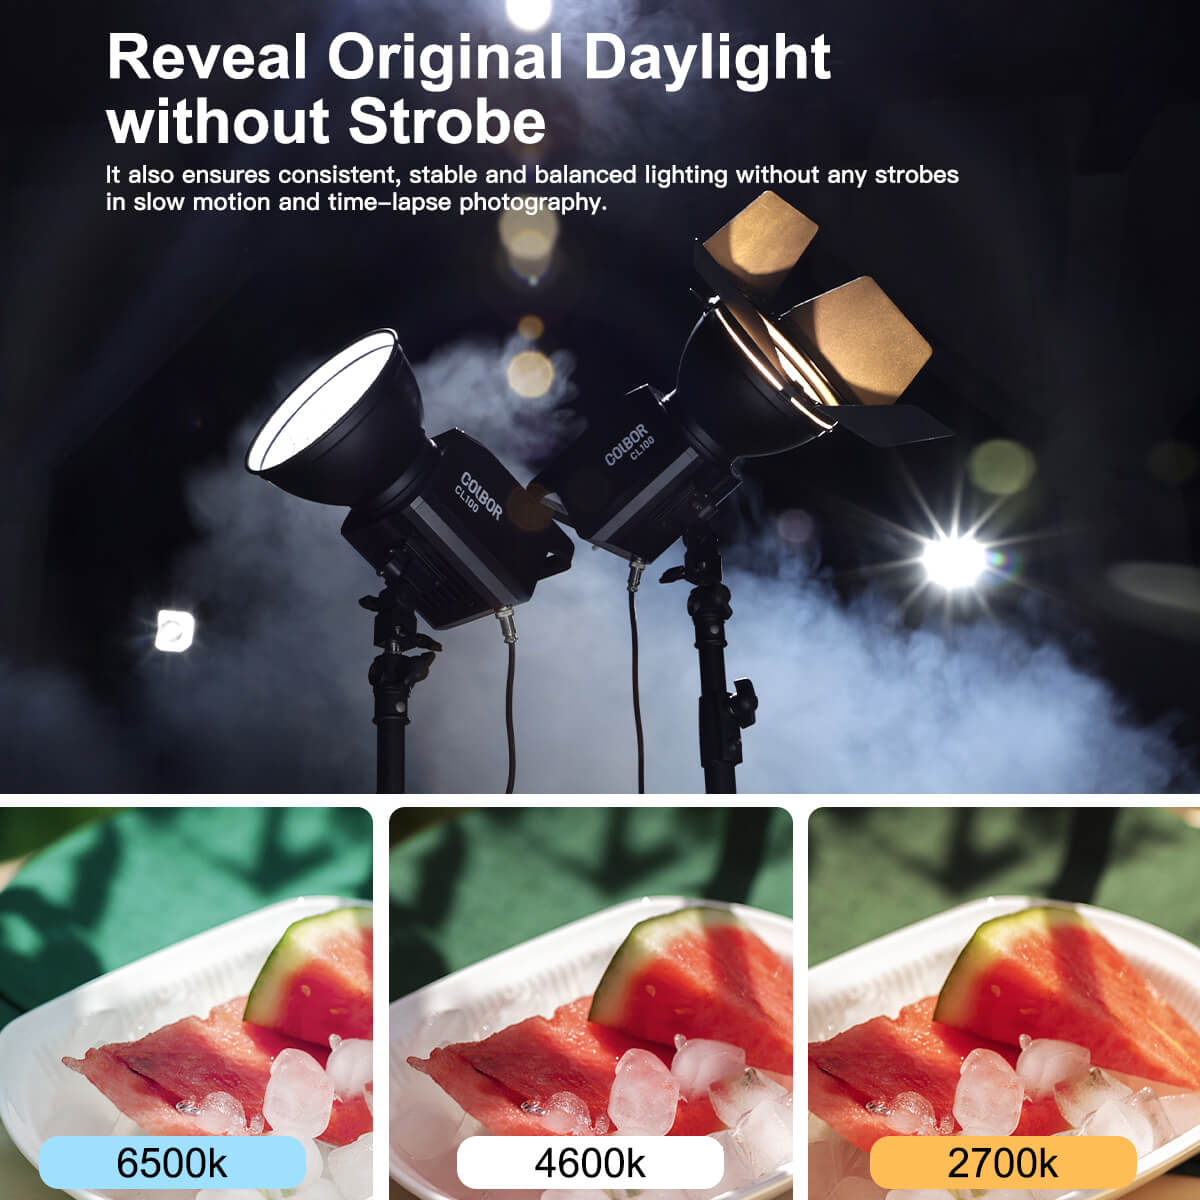 COLBOR CL100 produces natural daylight between 2700K to 6500K without any strobe in time-lapse photography